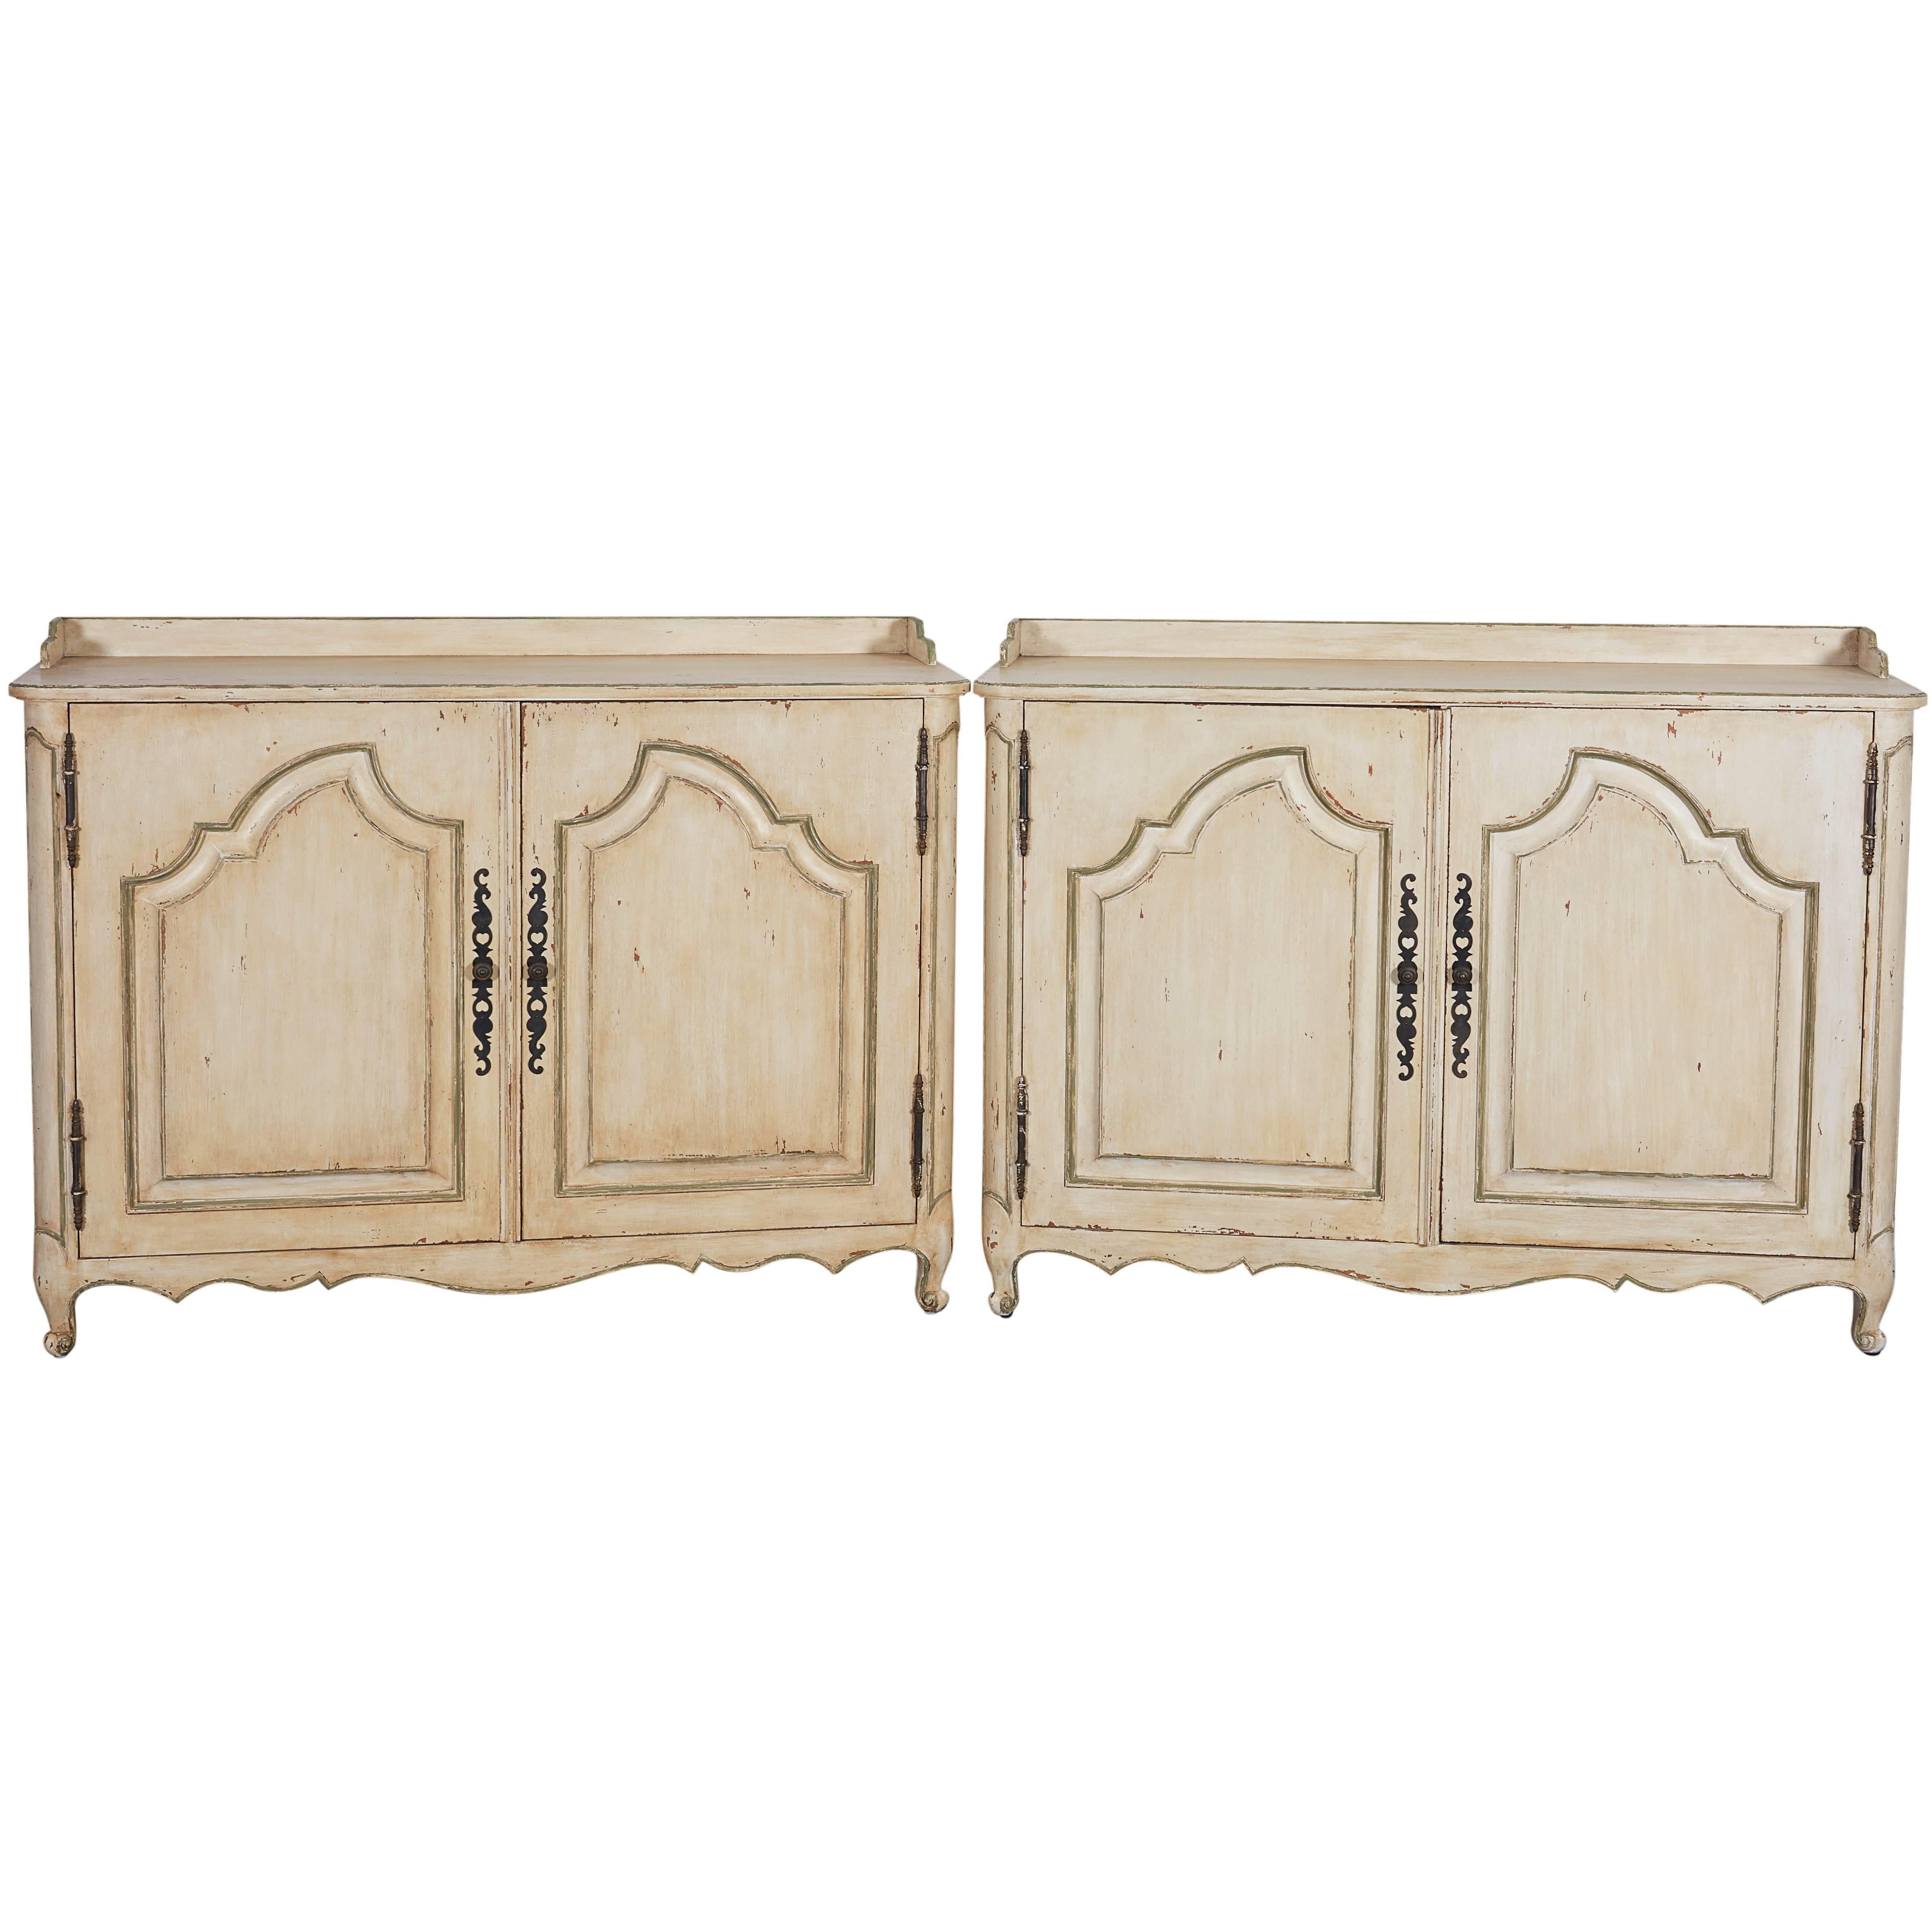 Pair of David Easton White-Washed Cabinets with Green Trim